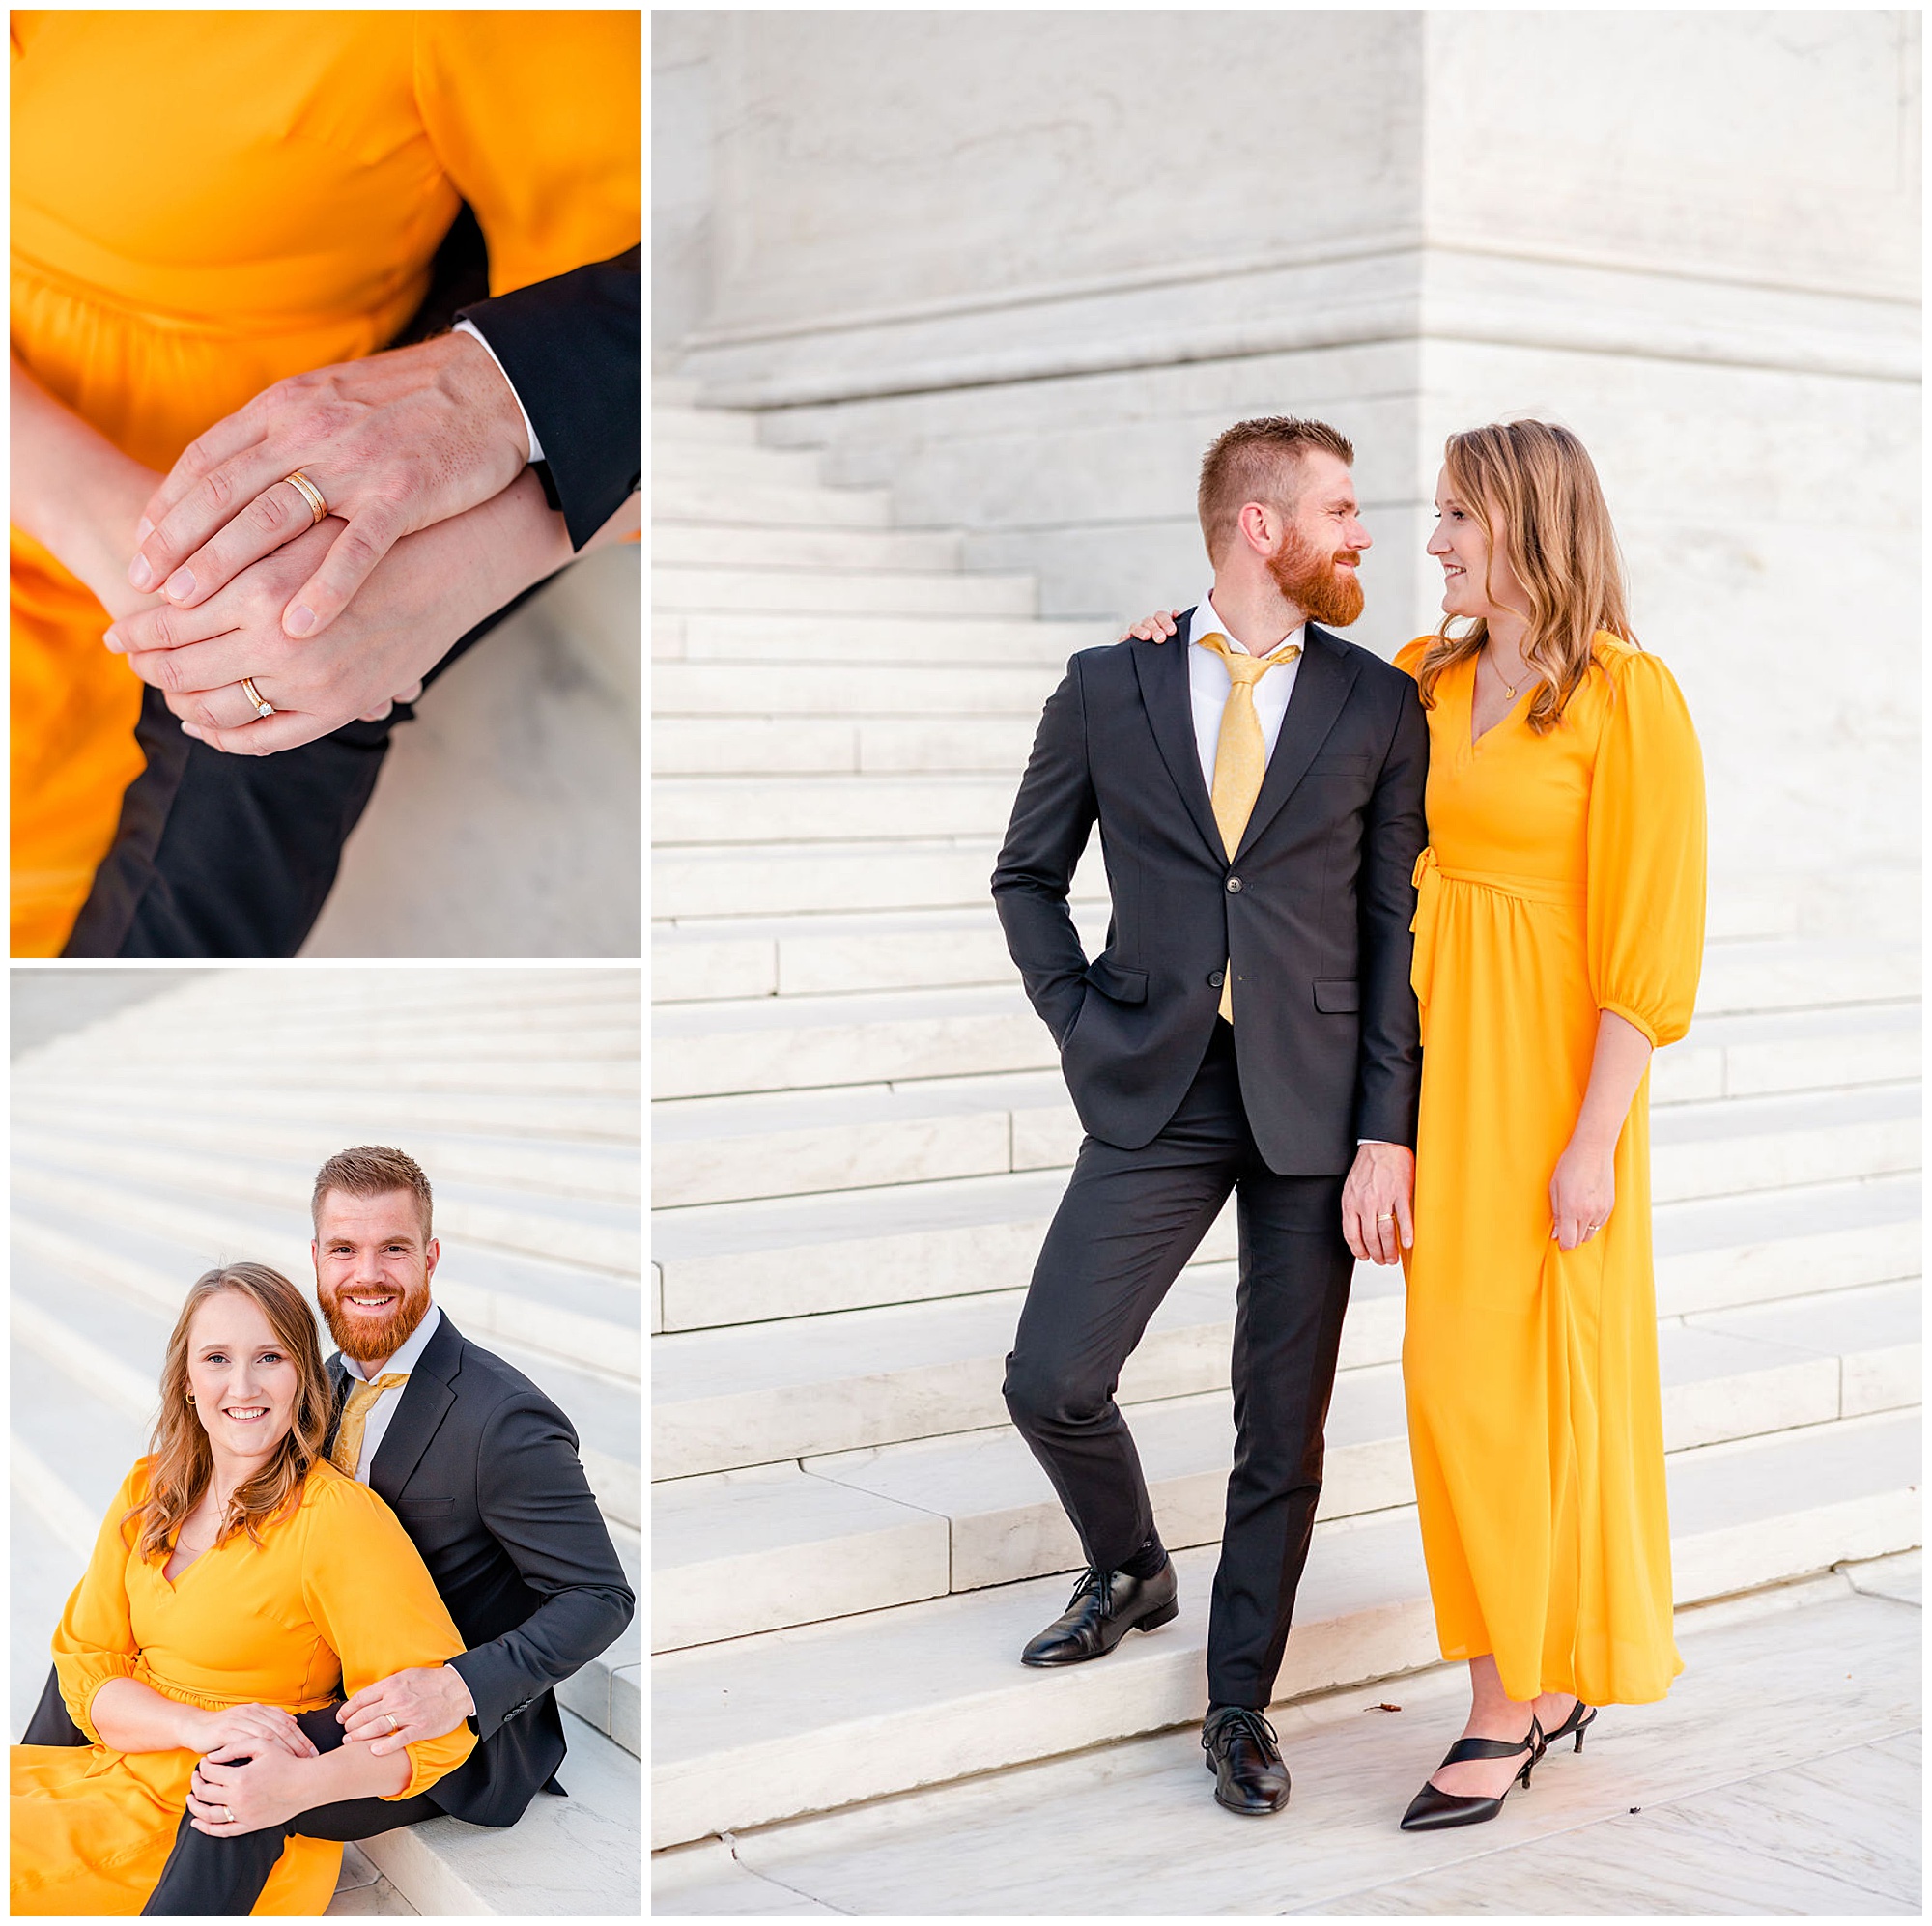 glowing Capitol Hill elopement portraits, Capitol Hill Washington DC, DC elopement portraits, DC elopement photographer, DC wedding photographer, DC portrait photographer, DC photographer, Capitol Hill portraits, autumn portraits, Capitol Hill photographer, Rachel E.H. Photography, close up of hands with wedding rings, couple sitting on marble steps